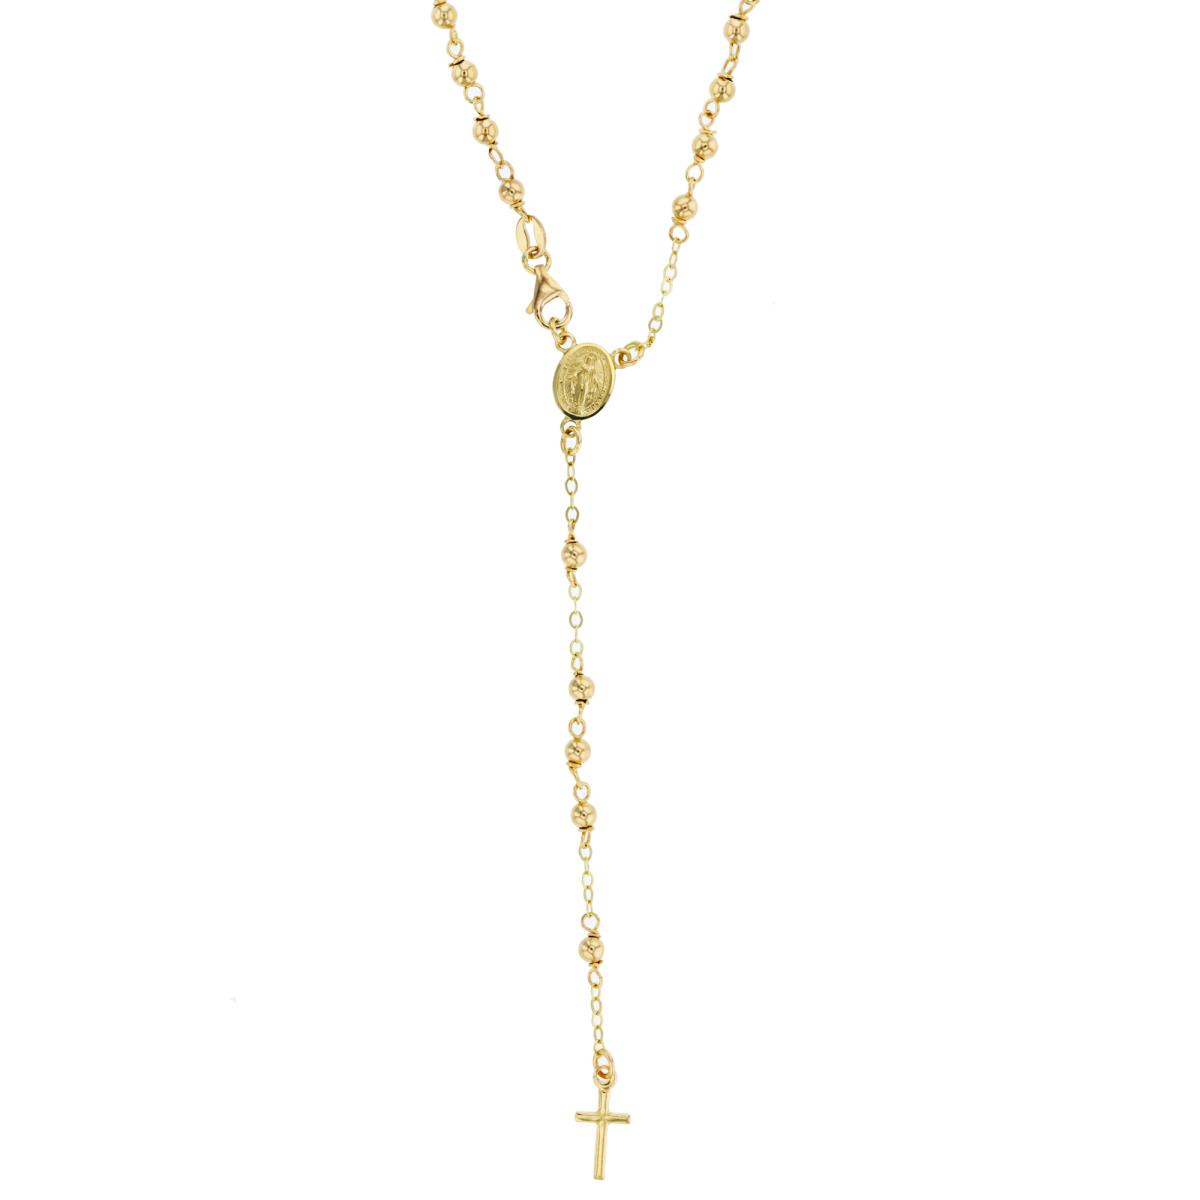 10K Yellow Gold 3mm Polished Beaded 25" Rosary Necklace